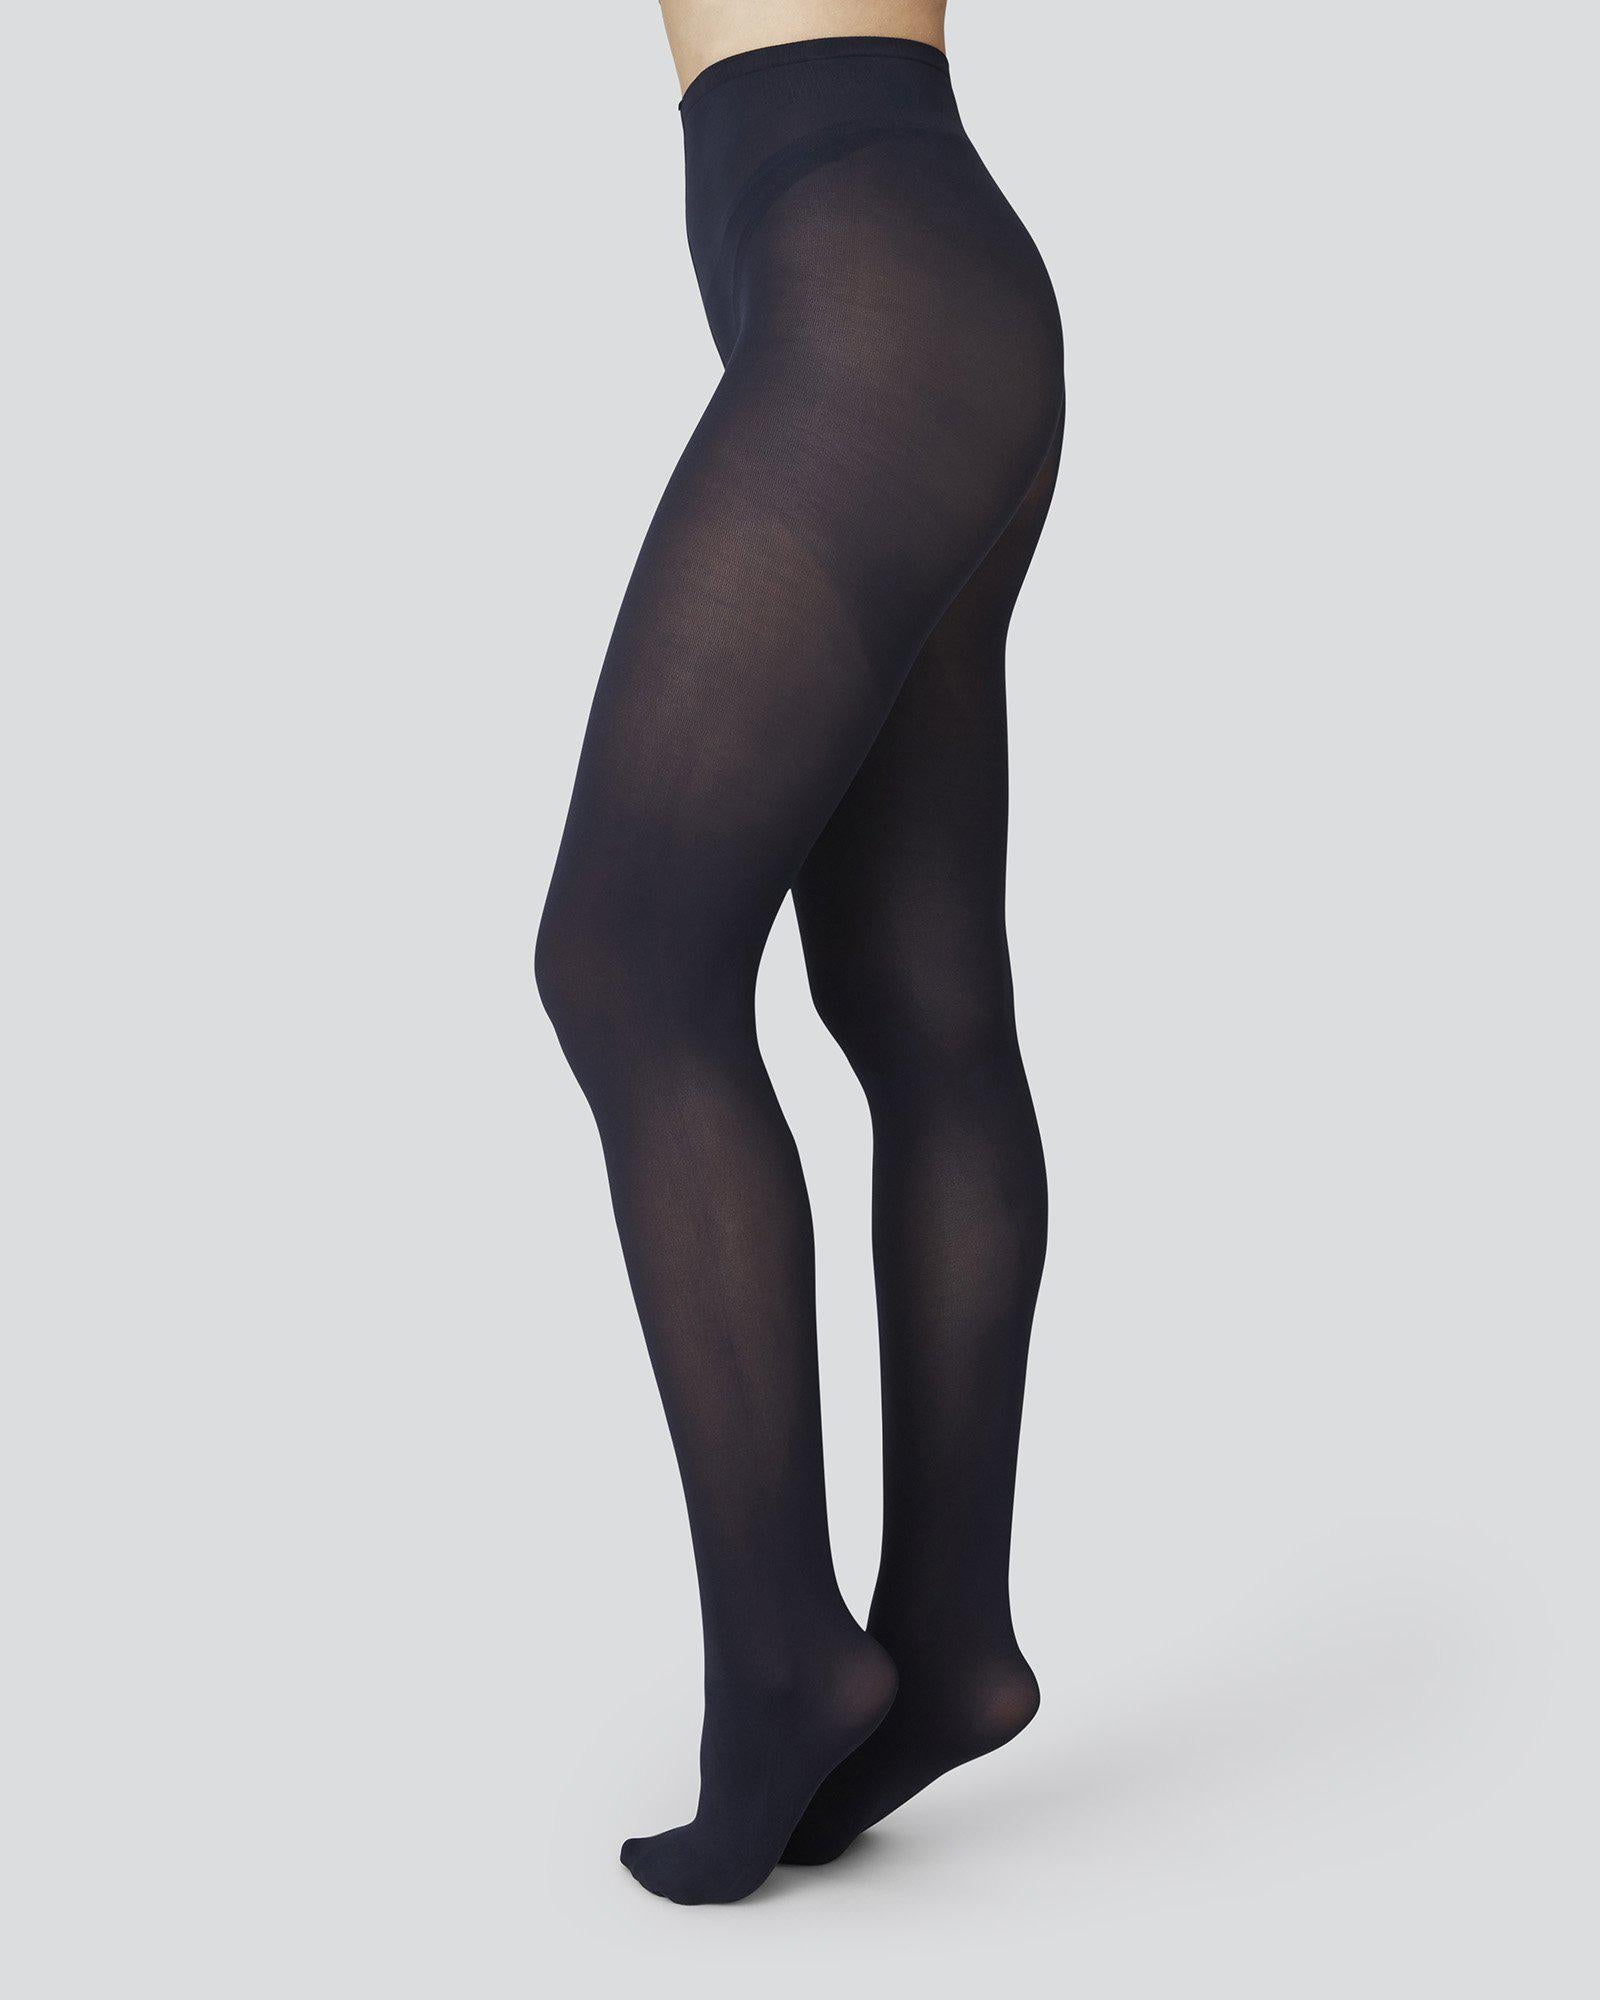 Blue Tights & Stockings for Women 